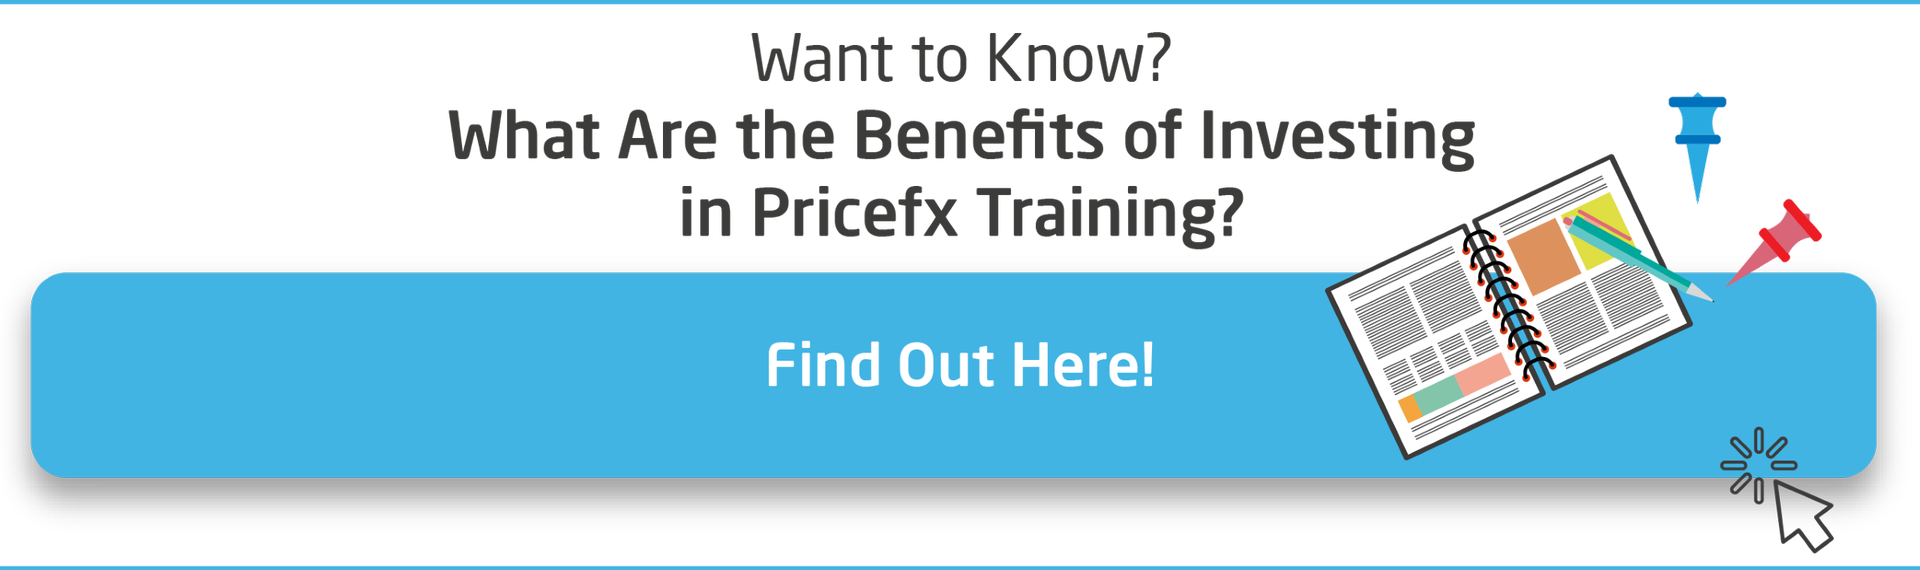 CTA-What-are-the-benefits-of-investing-in-Pricefx-training